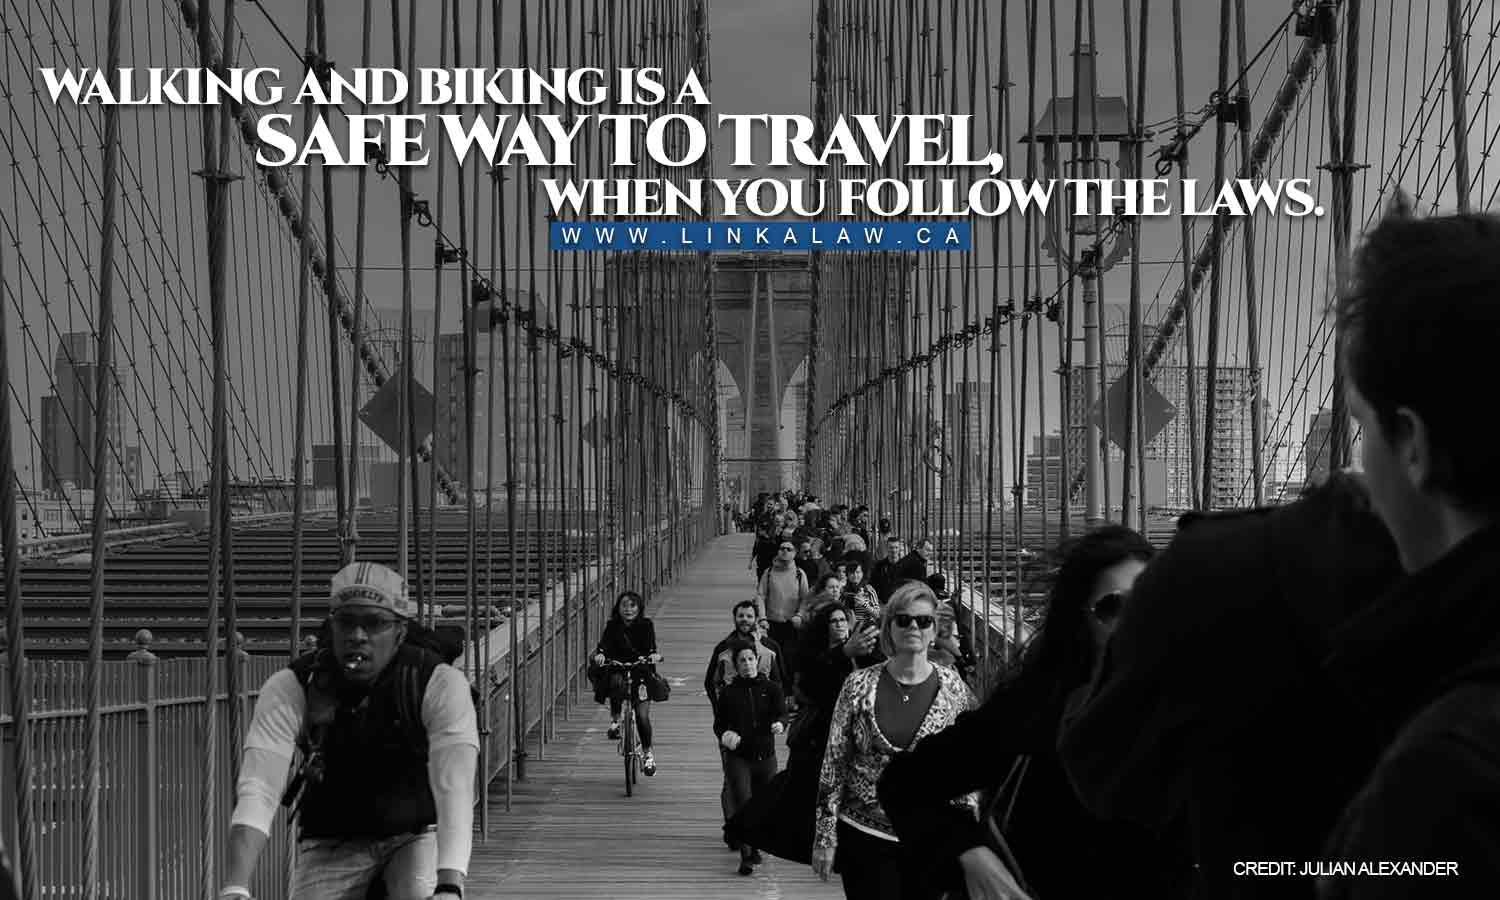 Walking and biking is a safe way to travel, when you follow the laws.